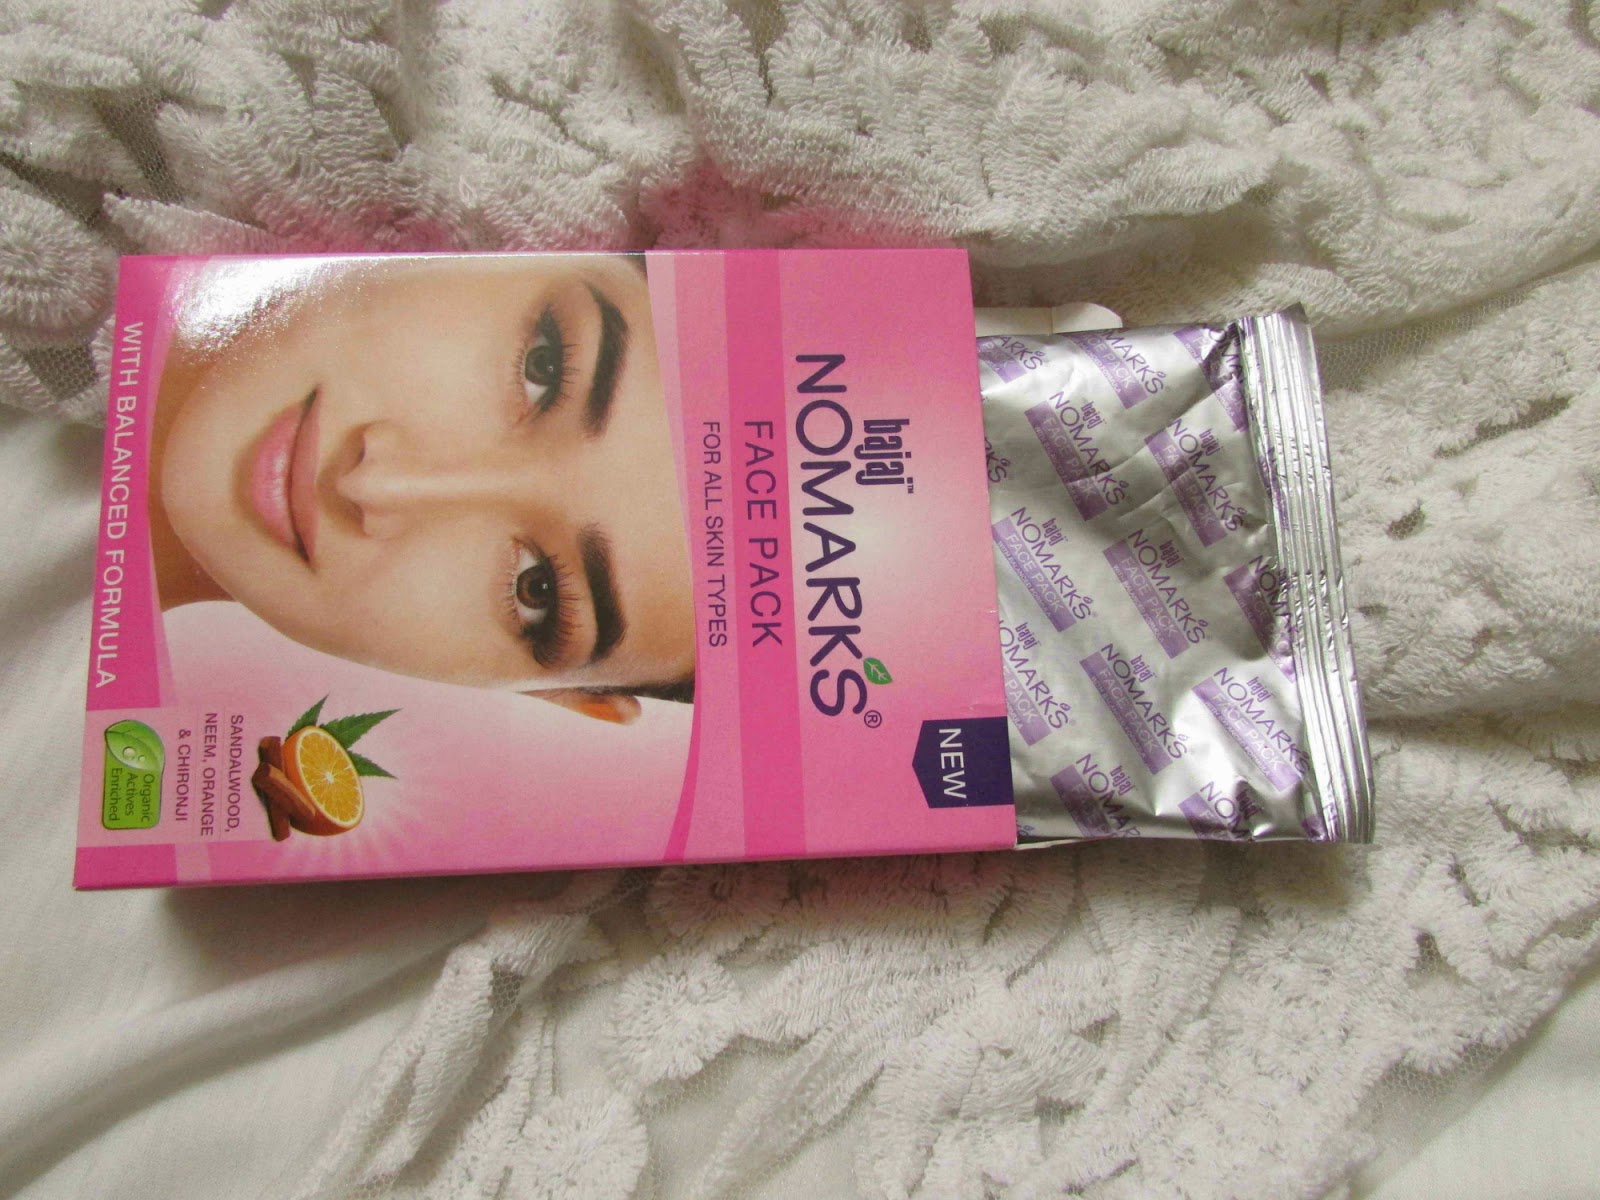 Nomarks Face Pack Review, Nomarks Face Pack Review India, best face pack, cheap face pack for all skin types, face pack for acne, best face pack for oily skin, skincare, oily skin skincare, how to get rid of acne,himiliya face pack , neem face pack , neem pack , himiliya neem pack , himiliya neem face pack , hilimiya neem face pack review , himiliya neem face pack review india , himiliya neem face pack price, himiliya neem pace pack price, face pack for oily skin , face pack for acne prone skin , face pack for oil and acne prone skin , best face pack for oily skin , best face pack for acne probe skin , 